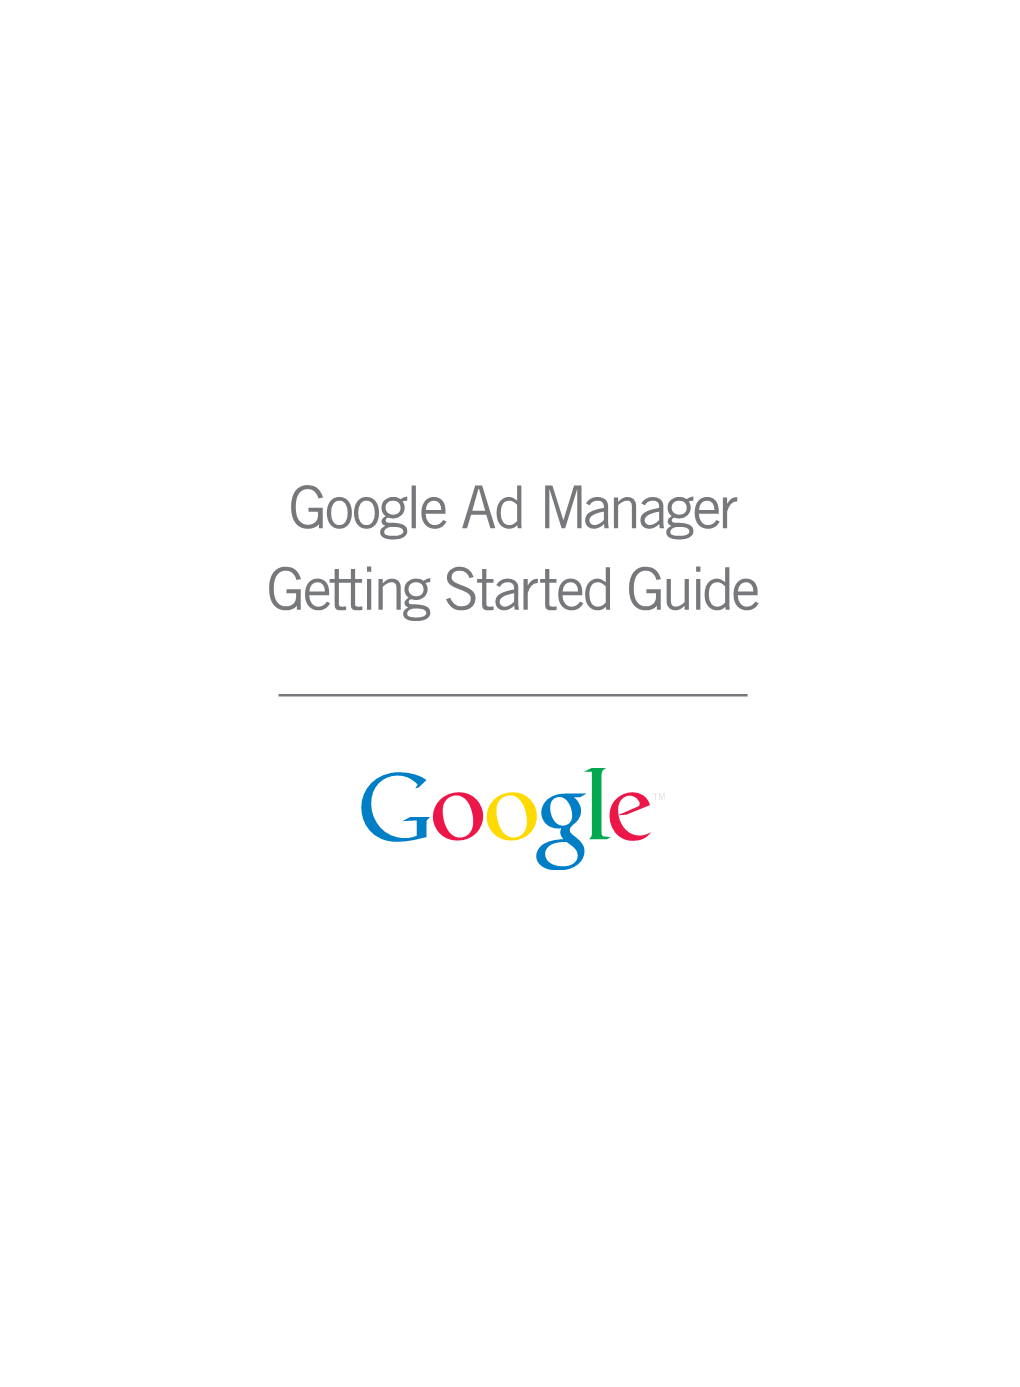 Google Ad Manager Getting Started Guide Welcome to Google Ad Manager!